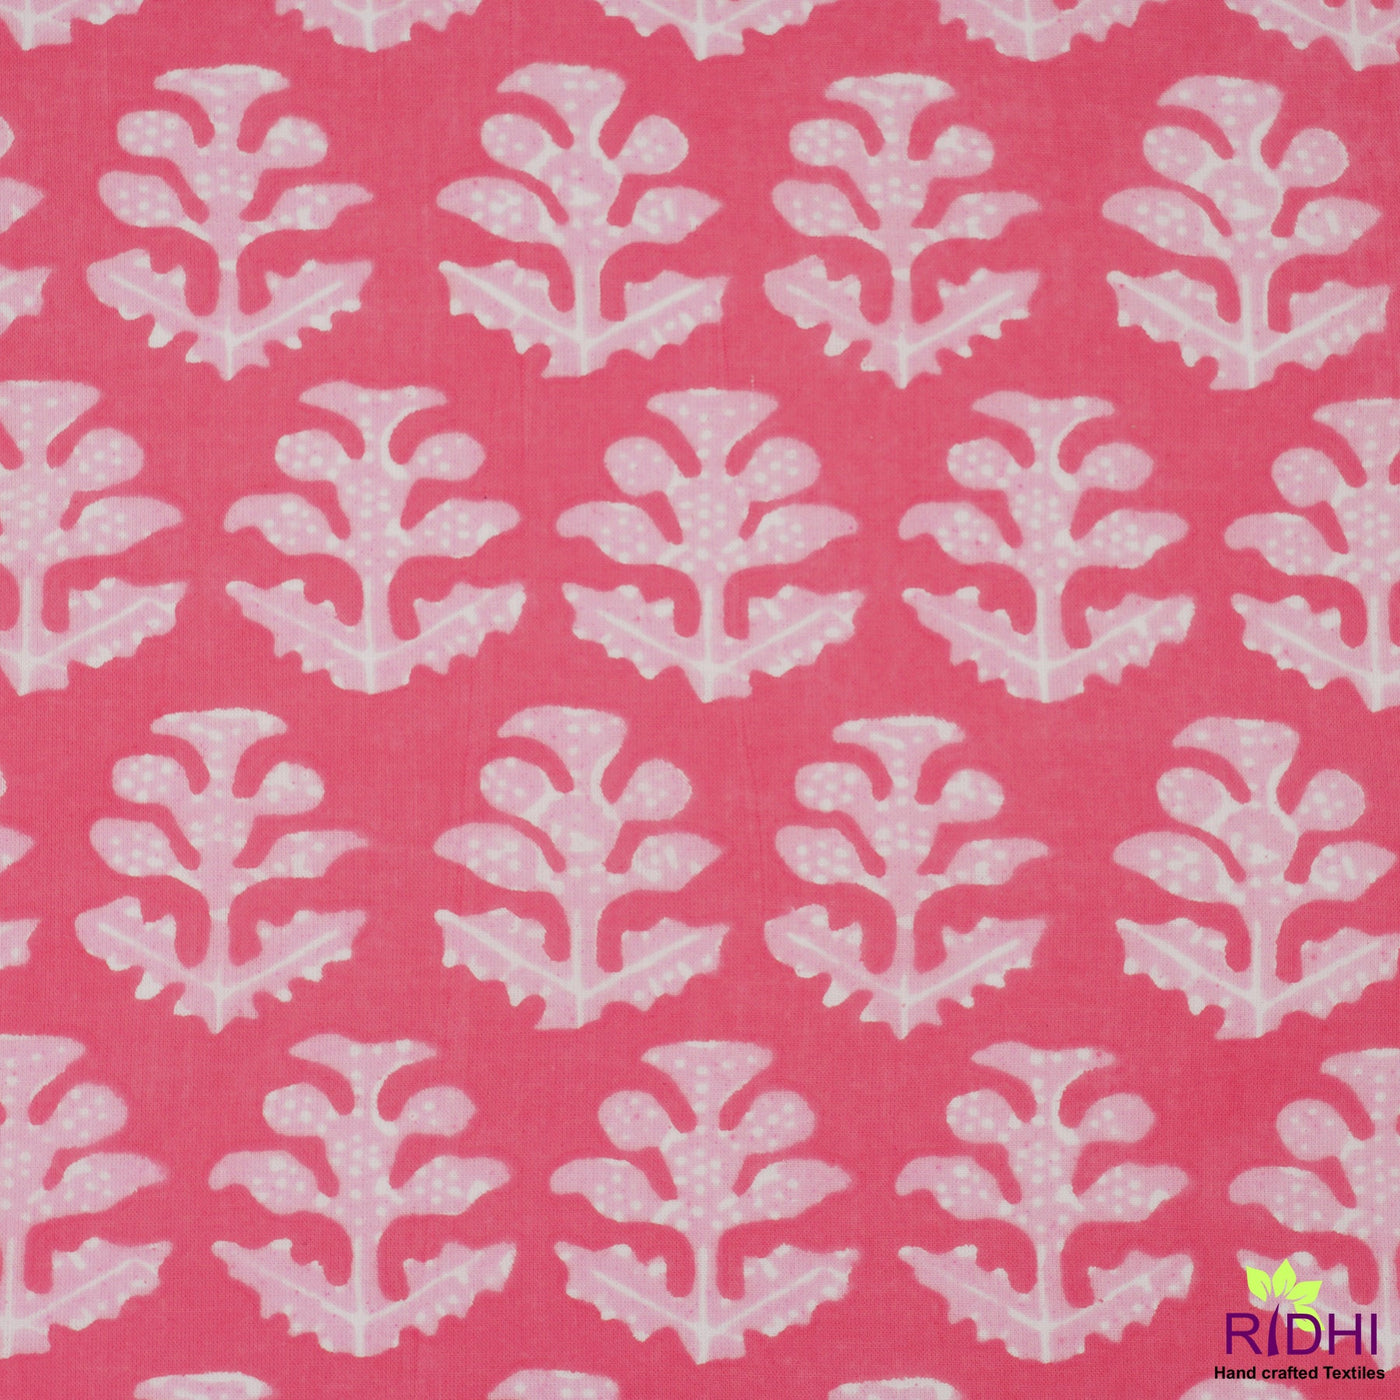 Fabricrush Watermelon and Lemonade Pink Indian Hand Block Floral Printed Cotton Cloth Napkins, Wedding Baby Shower Event, 18x18"- Cocktail 20x20"- Dinner